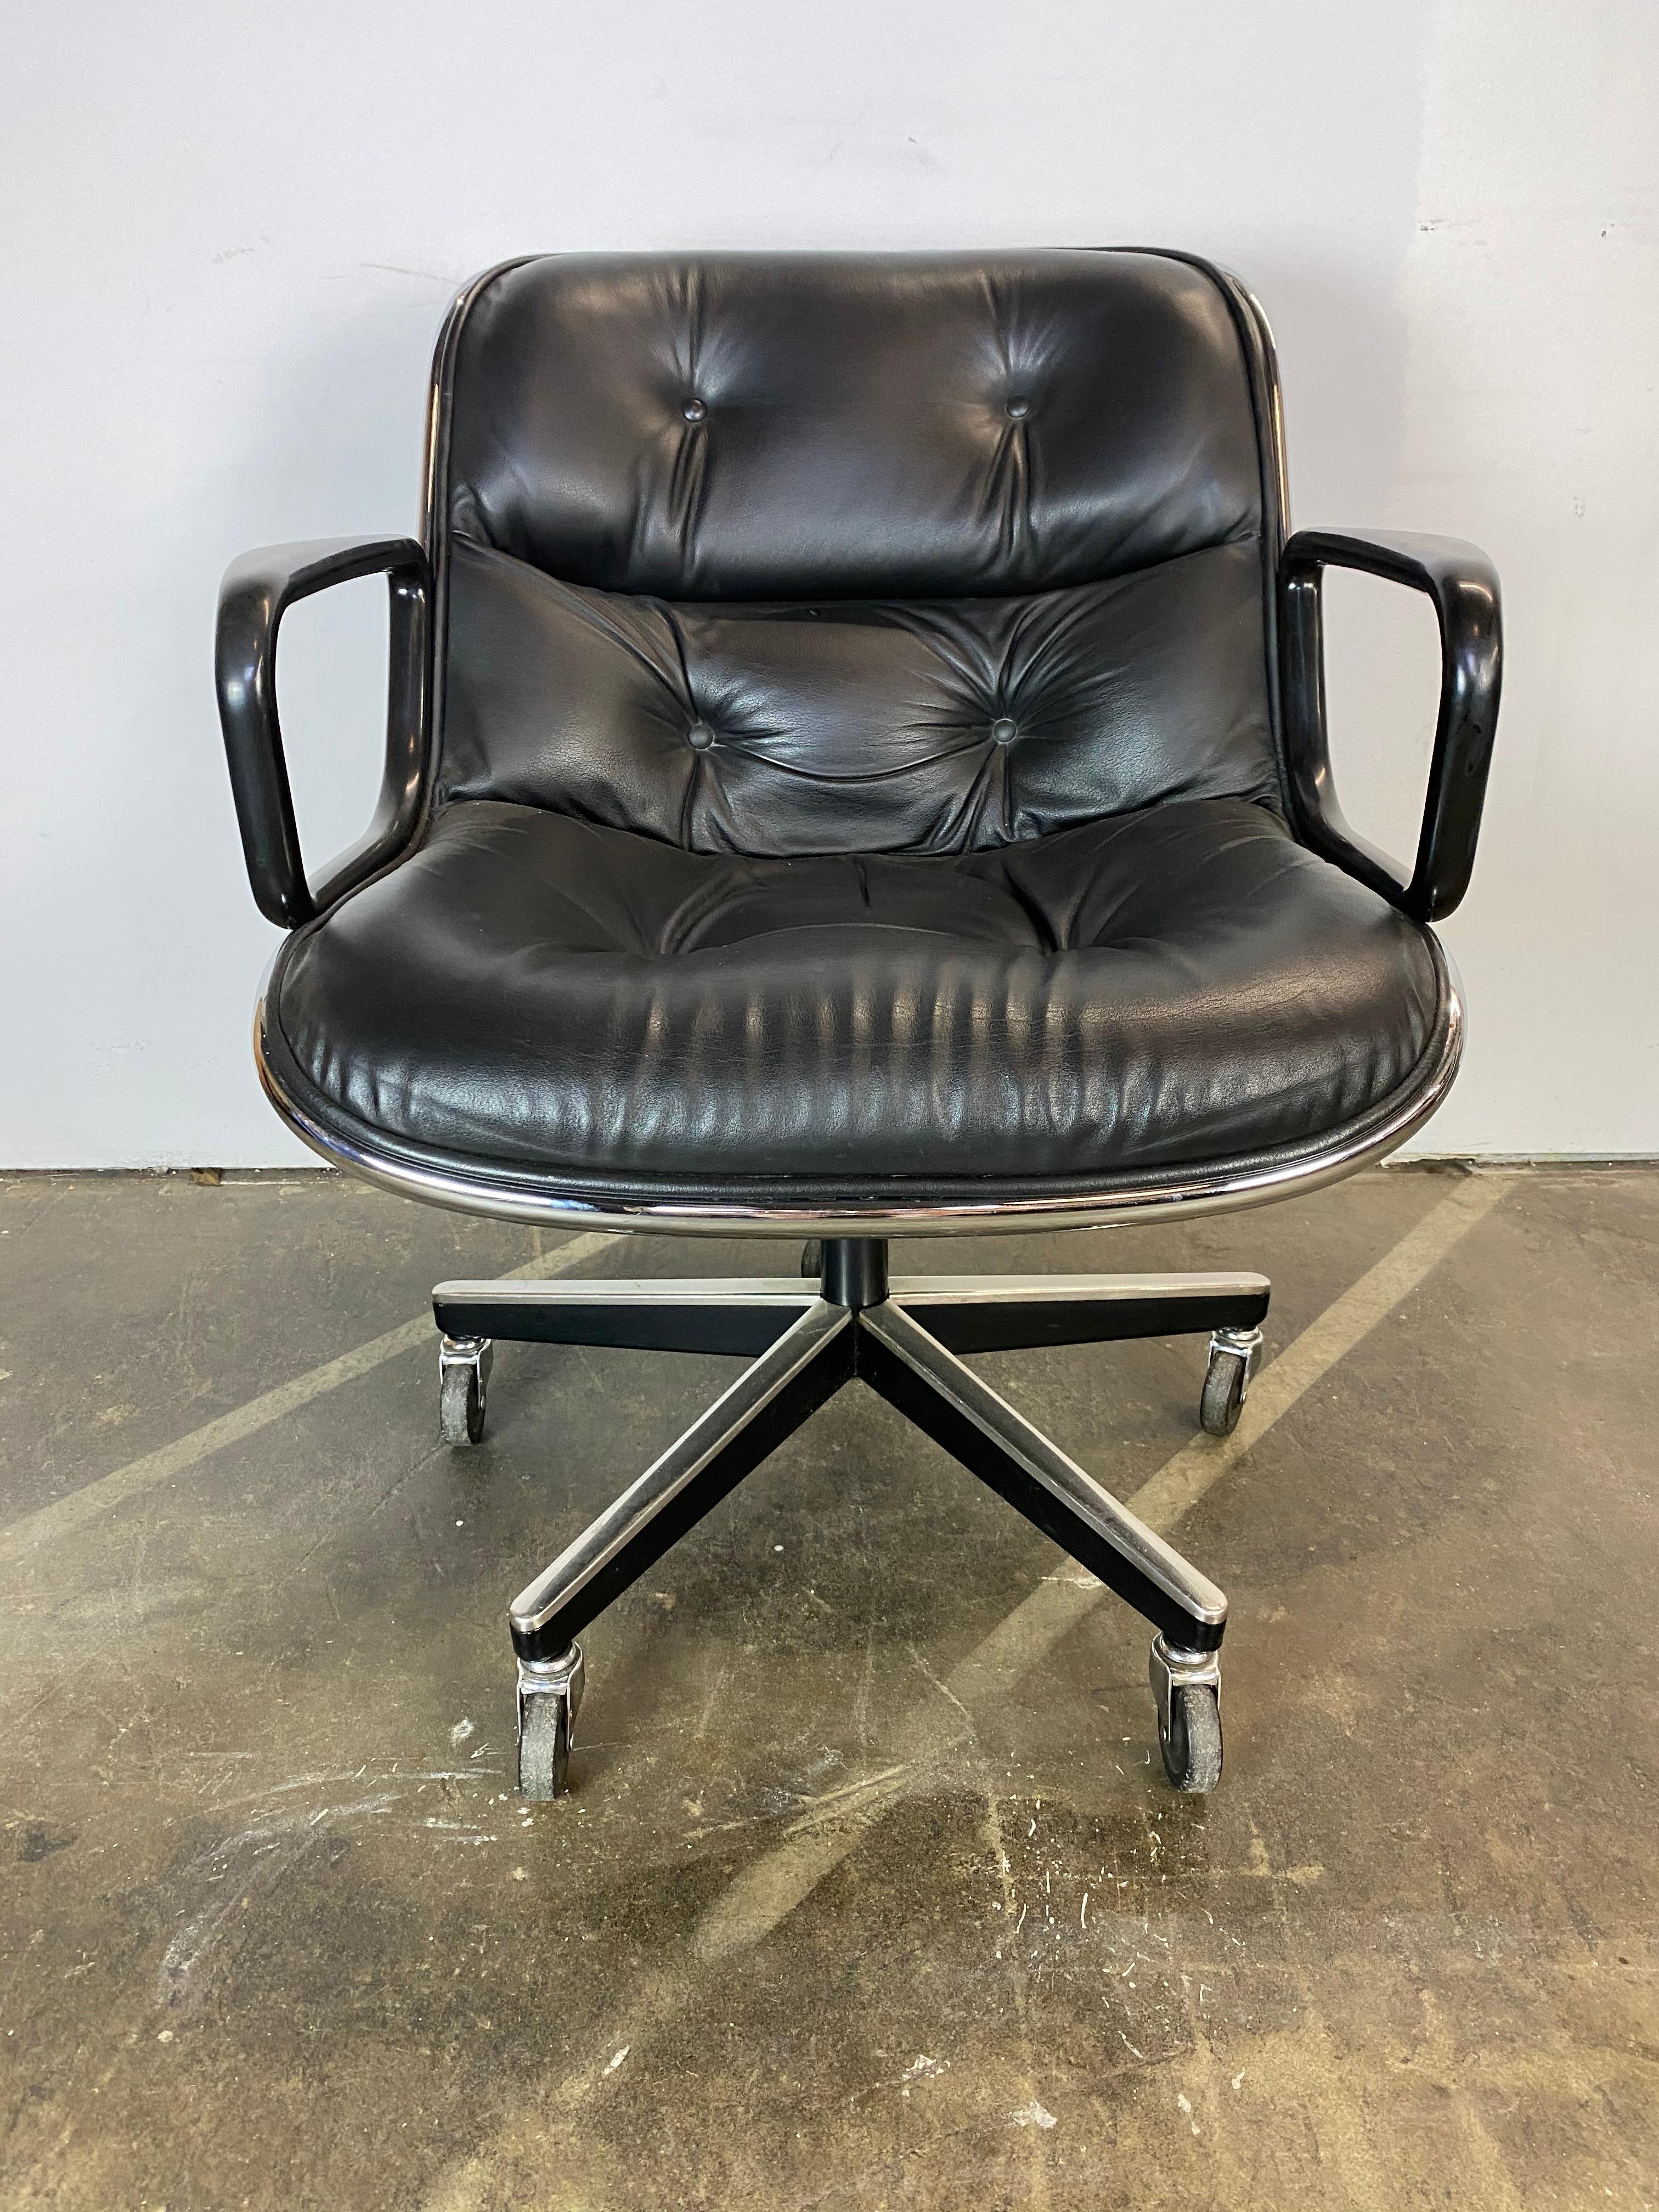 The Classic Pollock chair, designed by Charles Pollock for Knoll. After selling dozens of this design, it is in better condition than any other. And there are 2! They came from an auxiliary room in an office and were seldom used, hence the